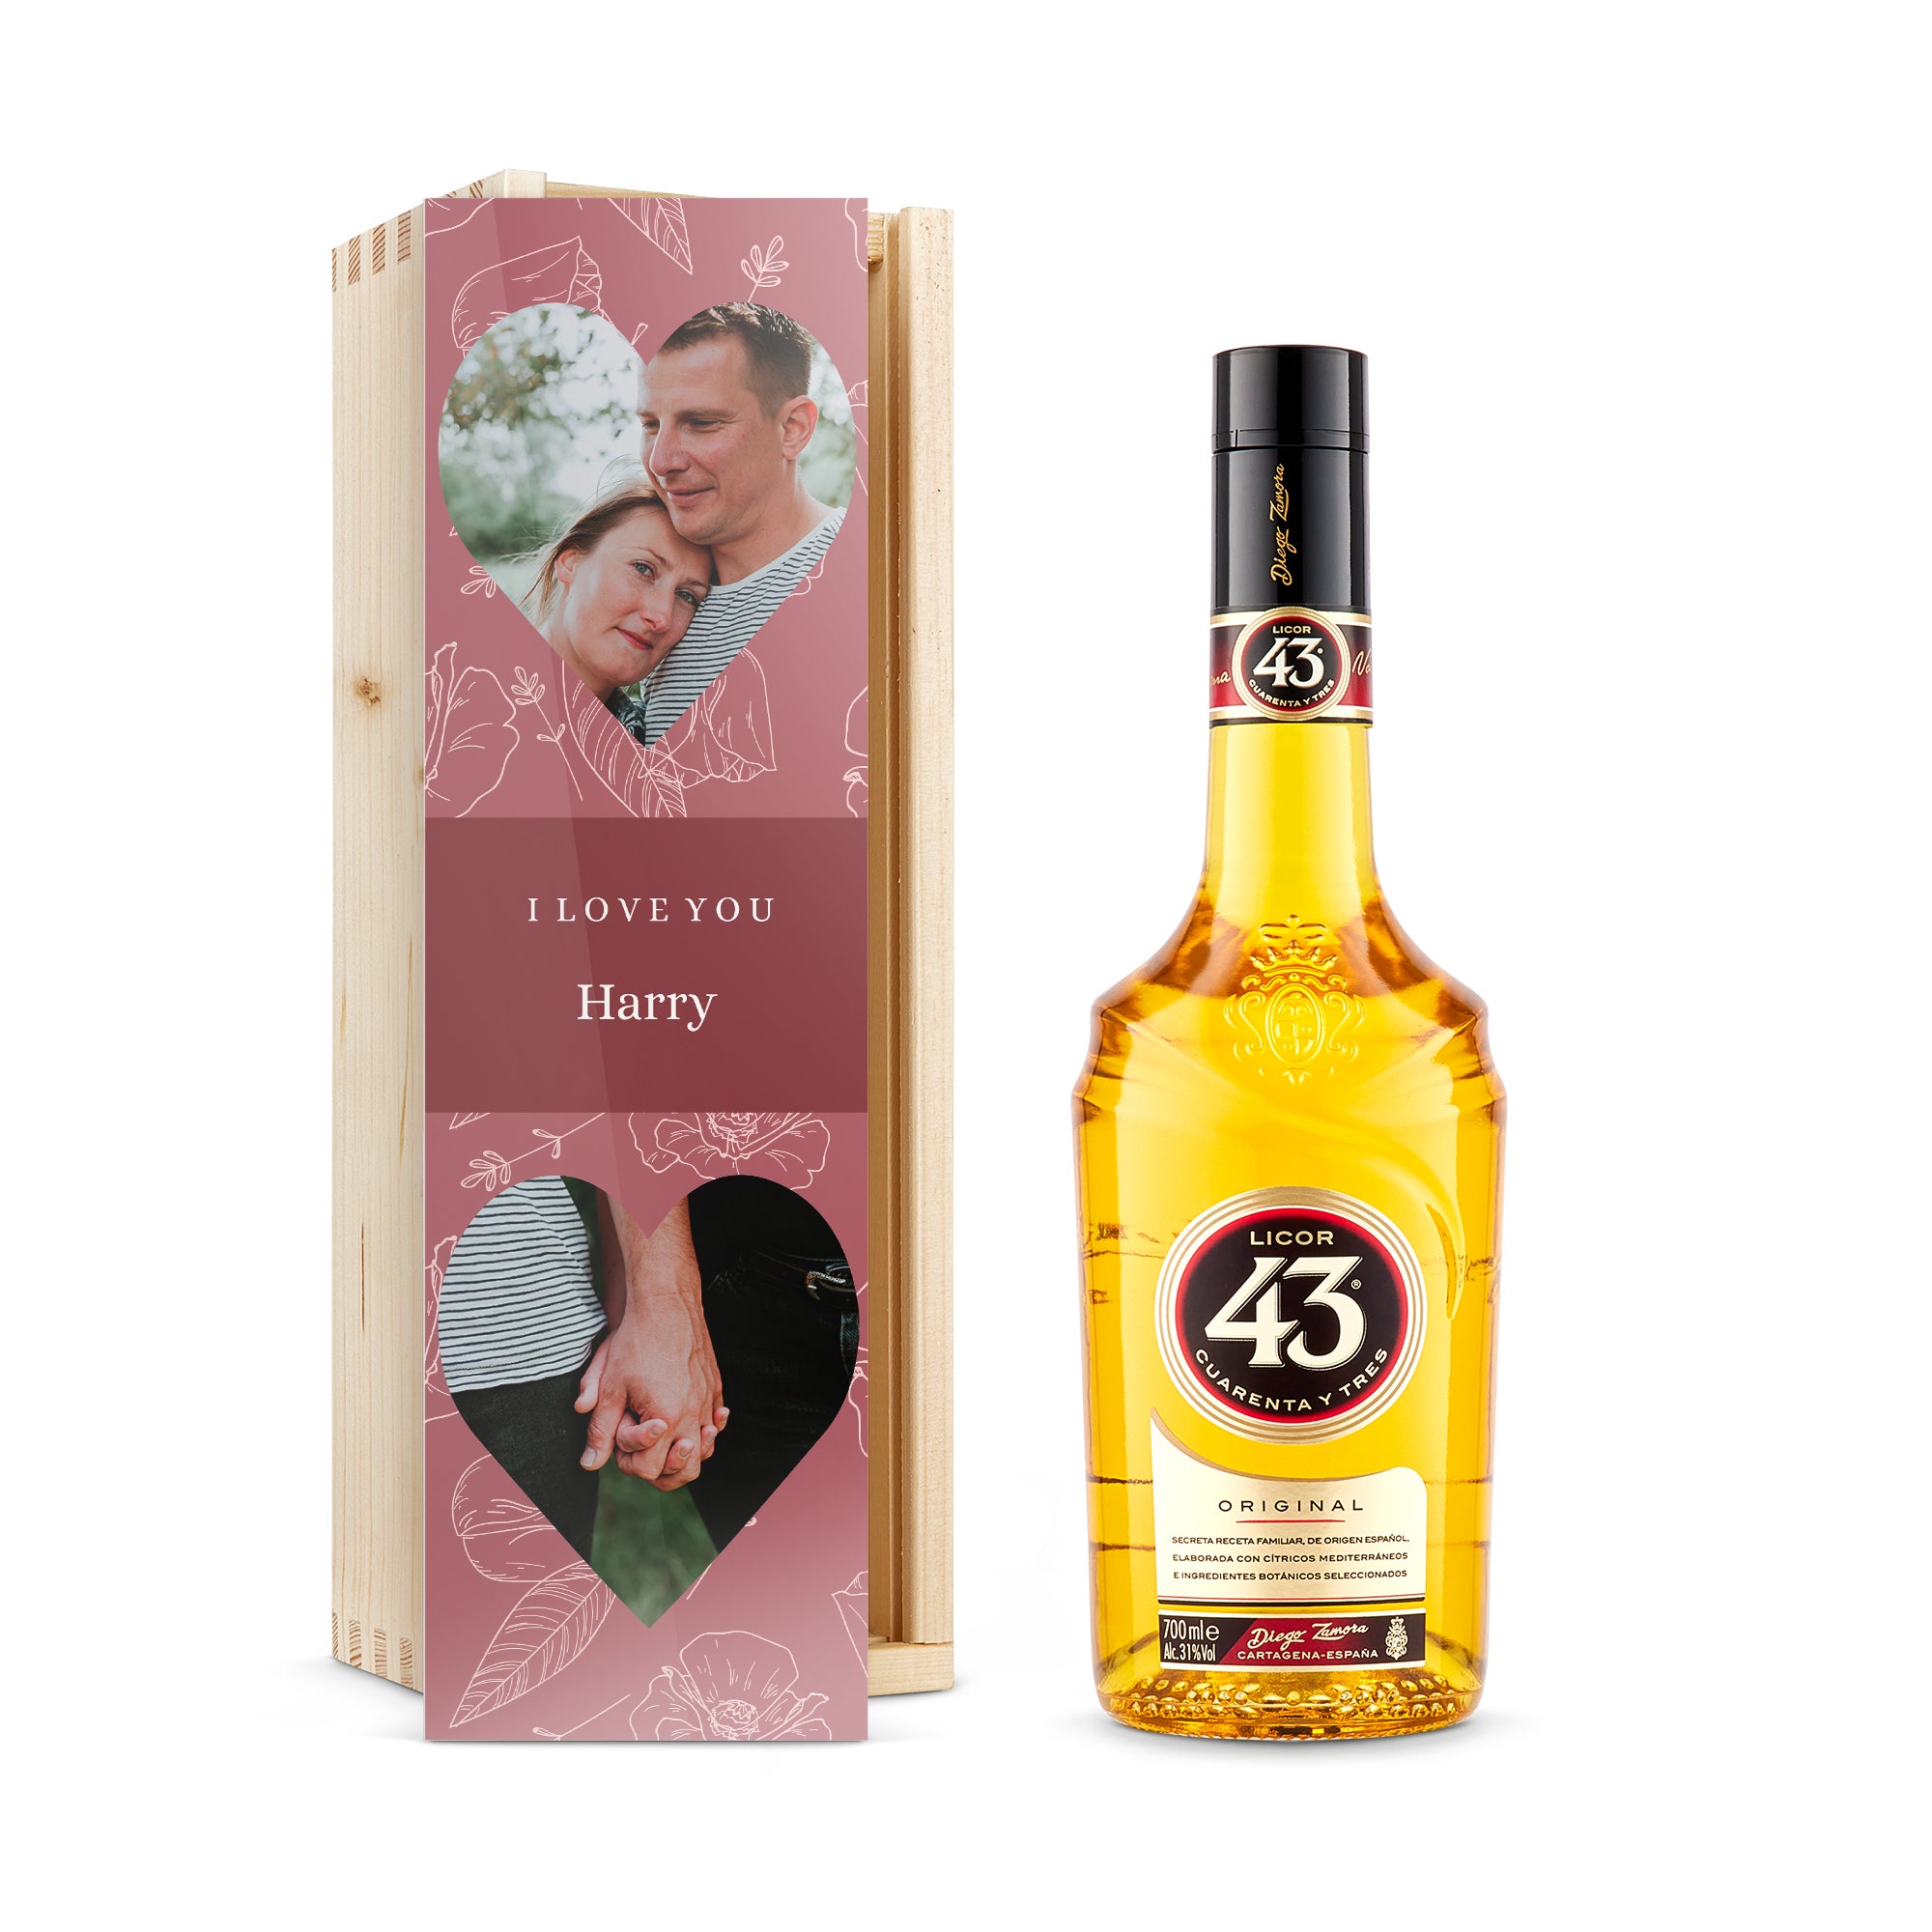 Personalised spirits - Licor 43 - Printed wooden case